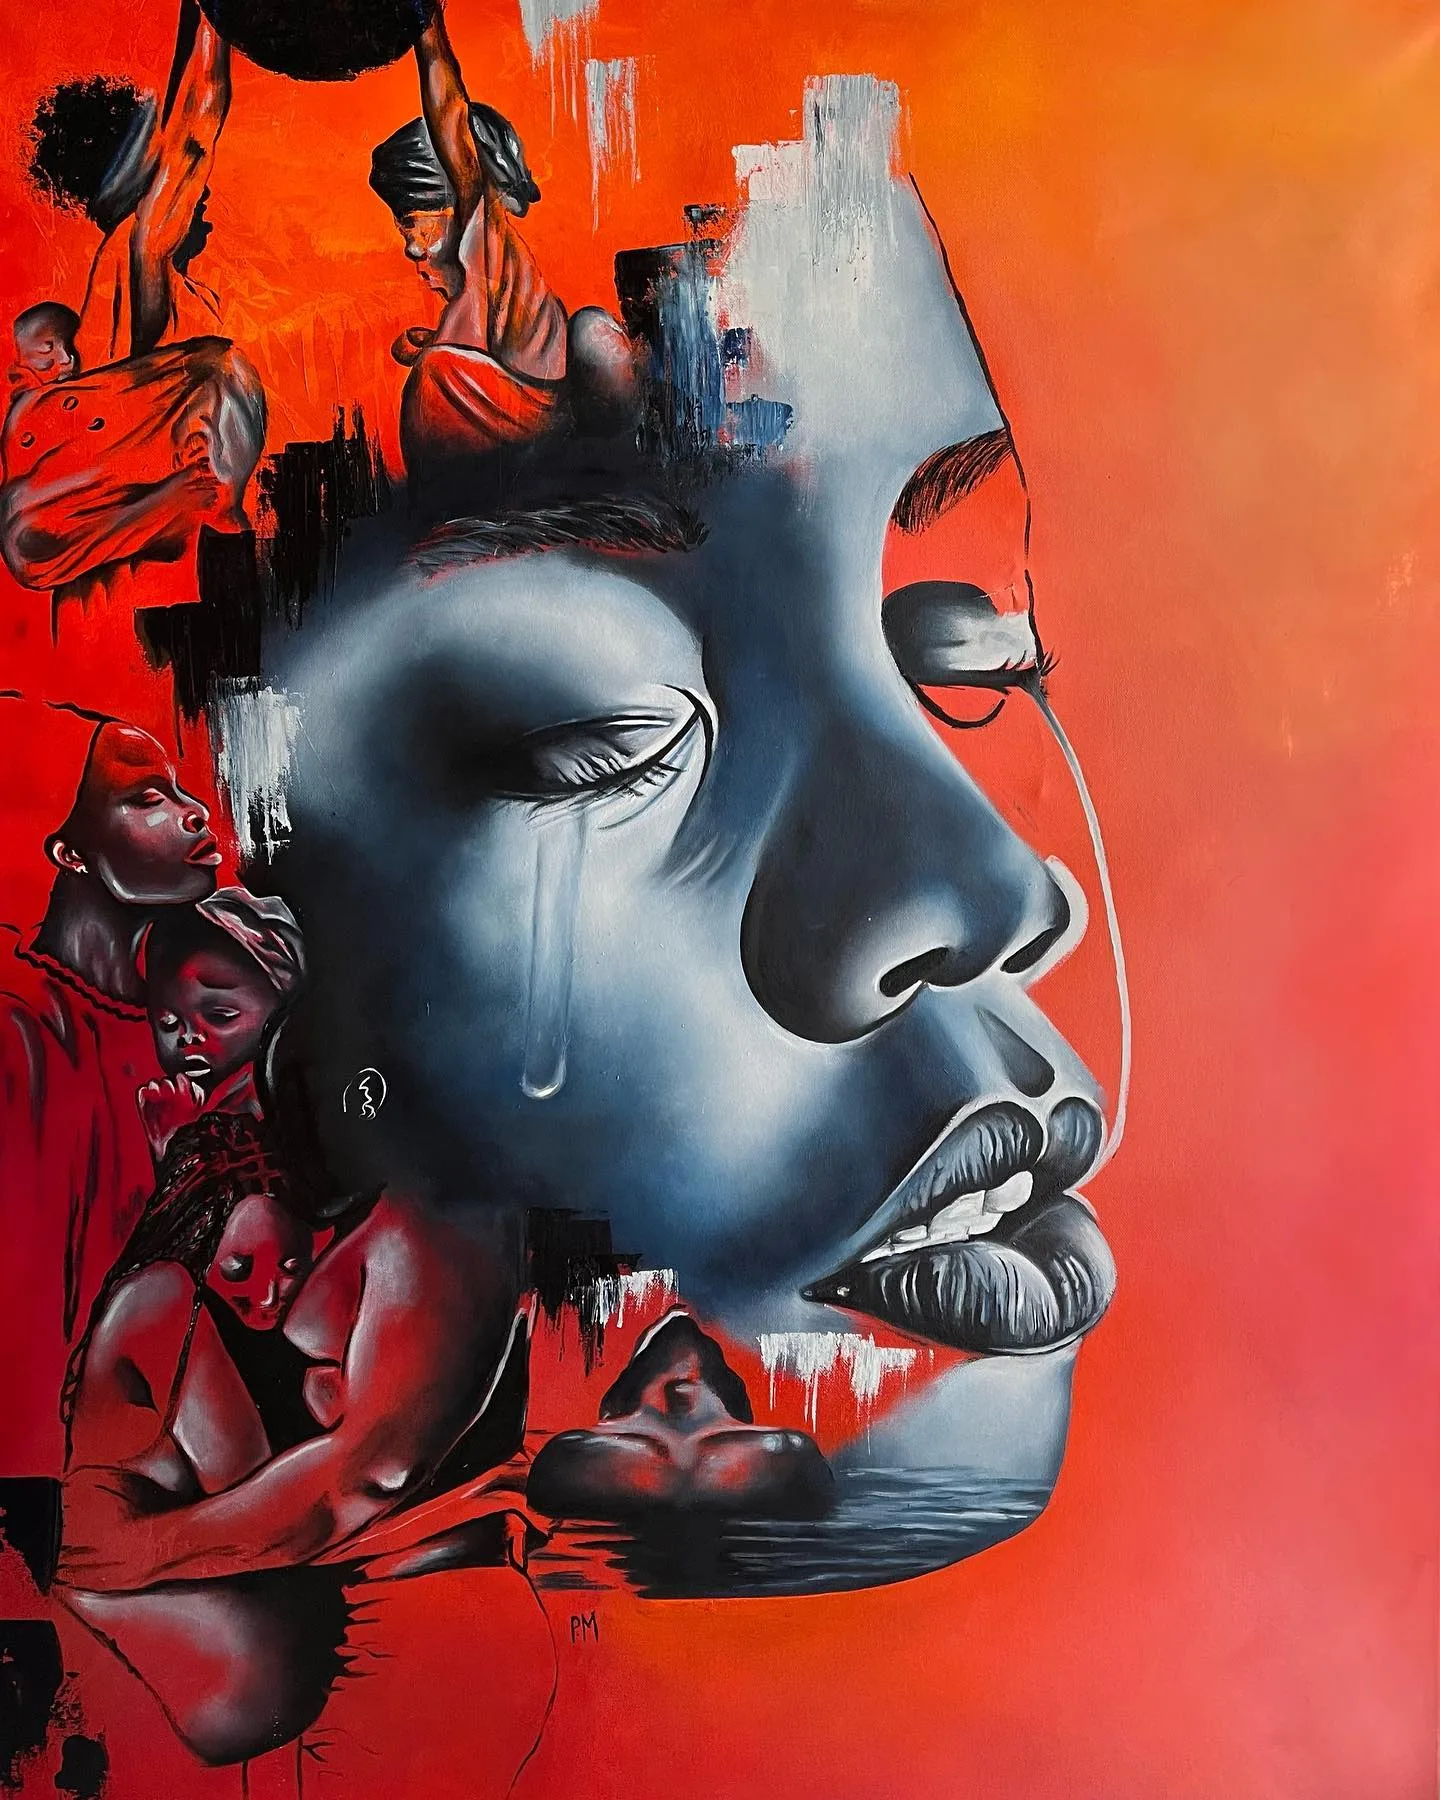 Basadi Tiyang: A Powerful Artistic Commentary on the Strength of Women